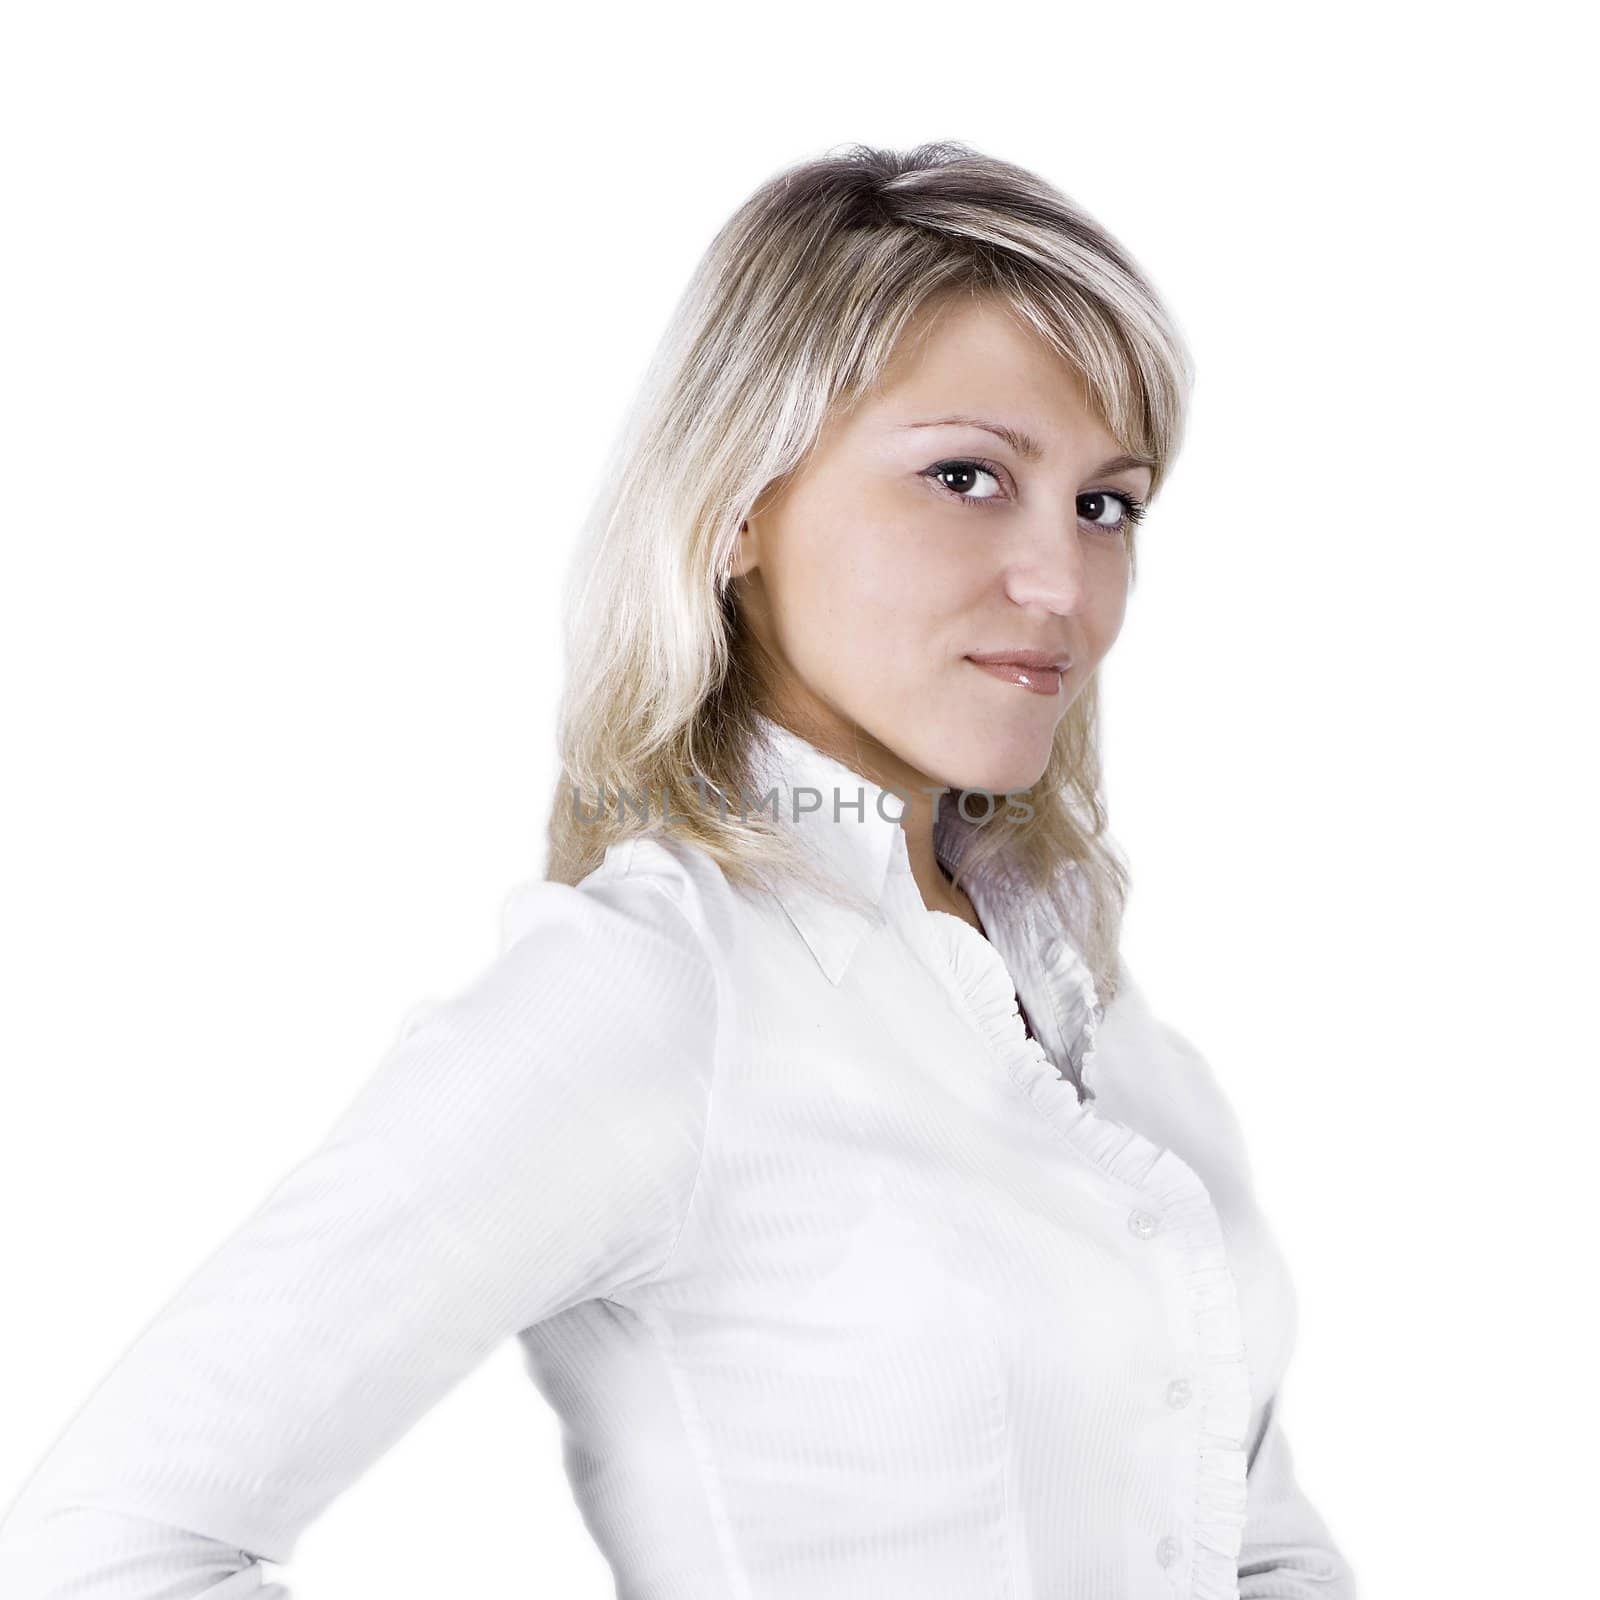 The business young woman on a white background